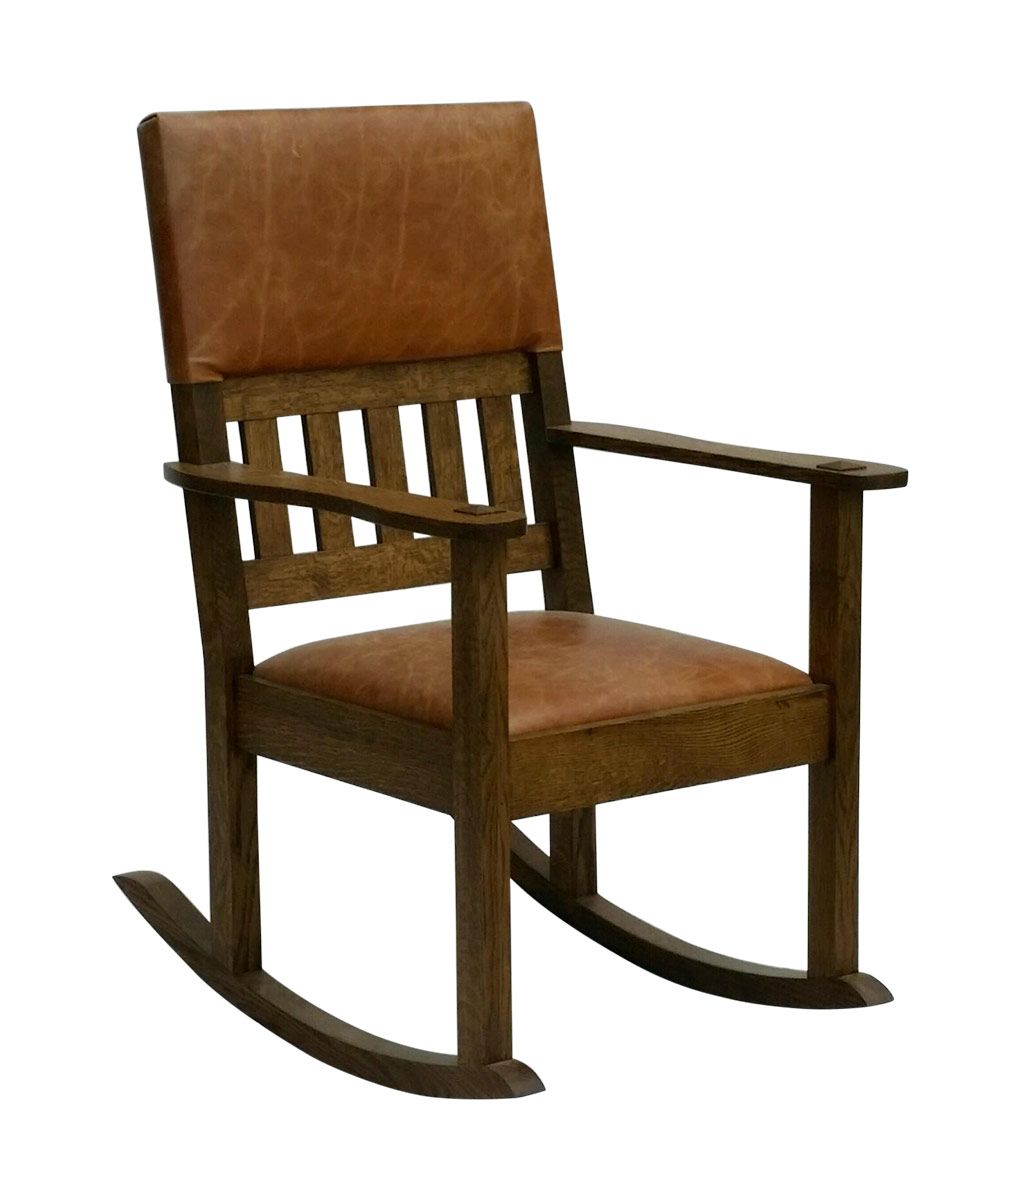 Big Cedar Rocker Throughout Mission Design Wood Rocking Chairs With Brown Leather Seat (View 7 of 20)